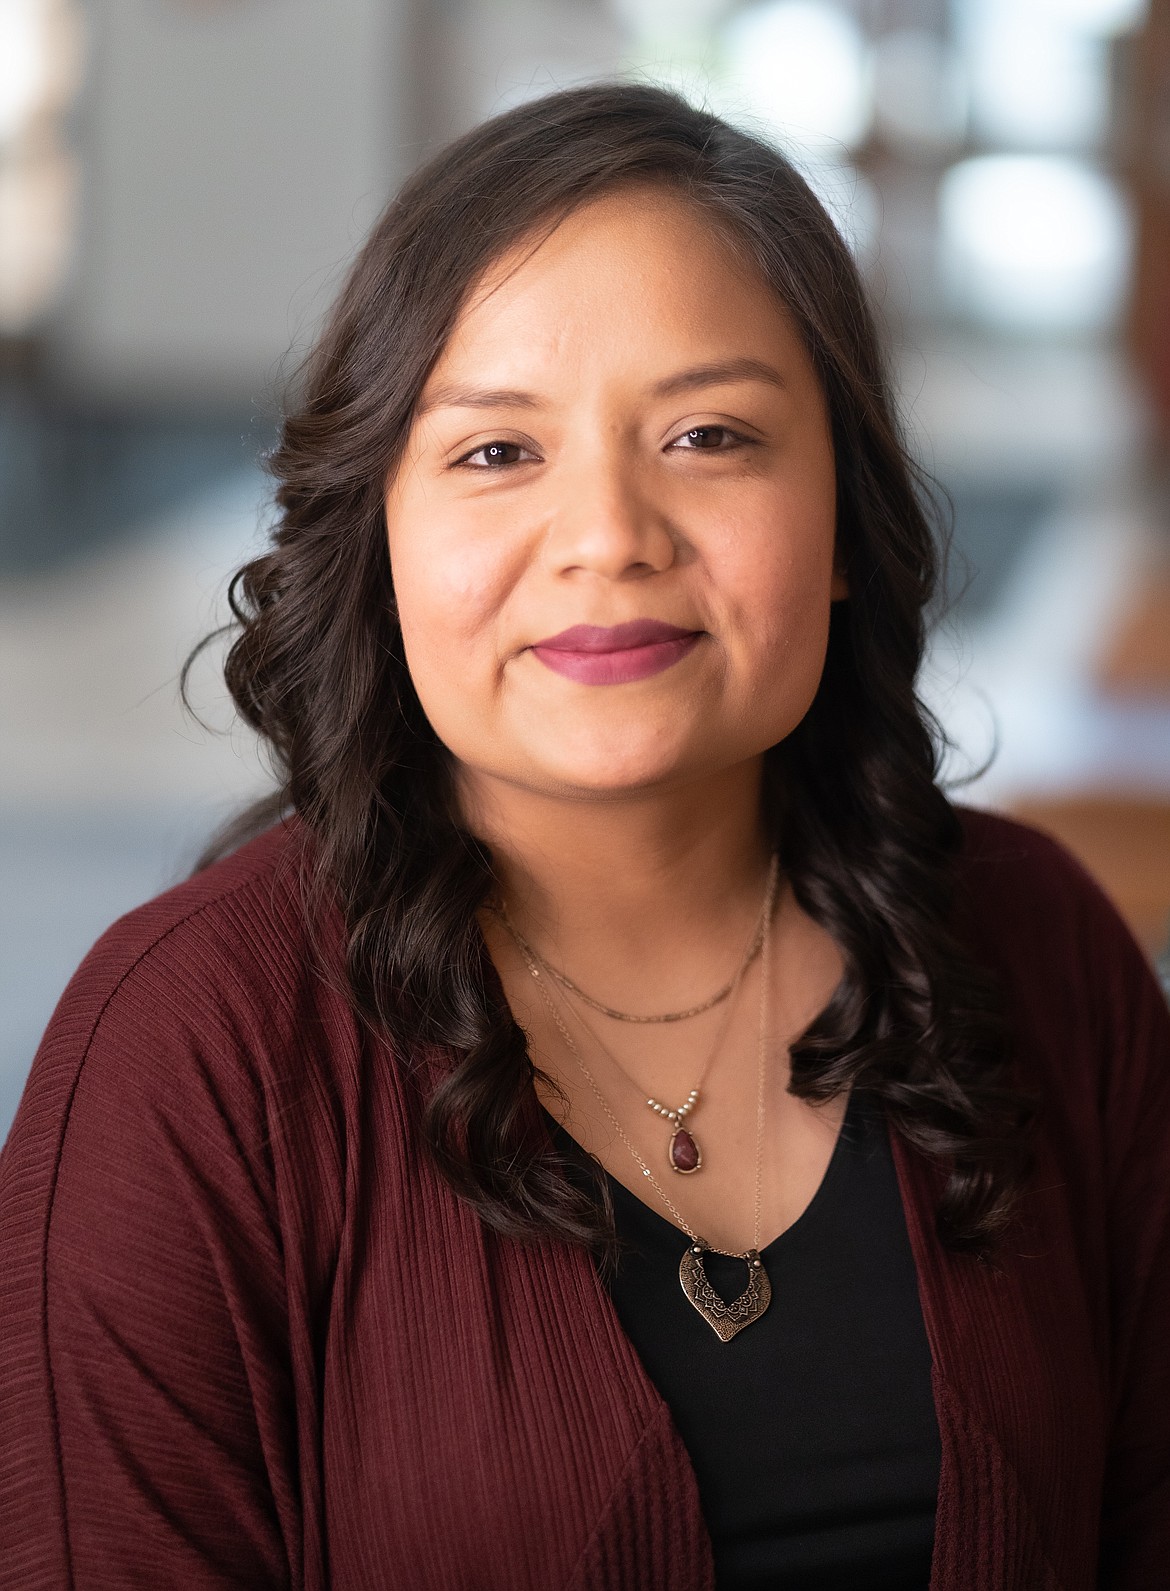 Maria Santillan, a student in the BAS-AM program, feels that the best part of the program is yet to come with the capstone project they will do this spring before graduation.